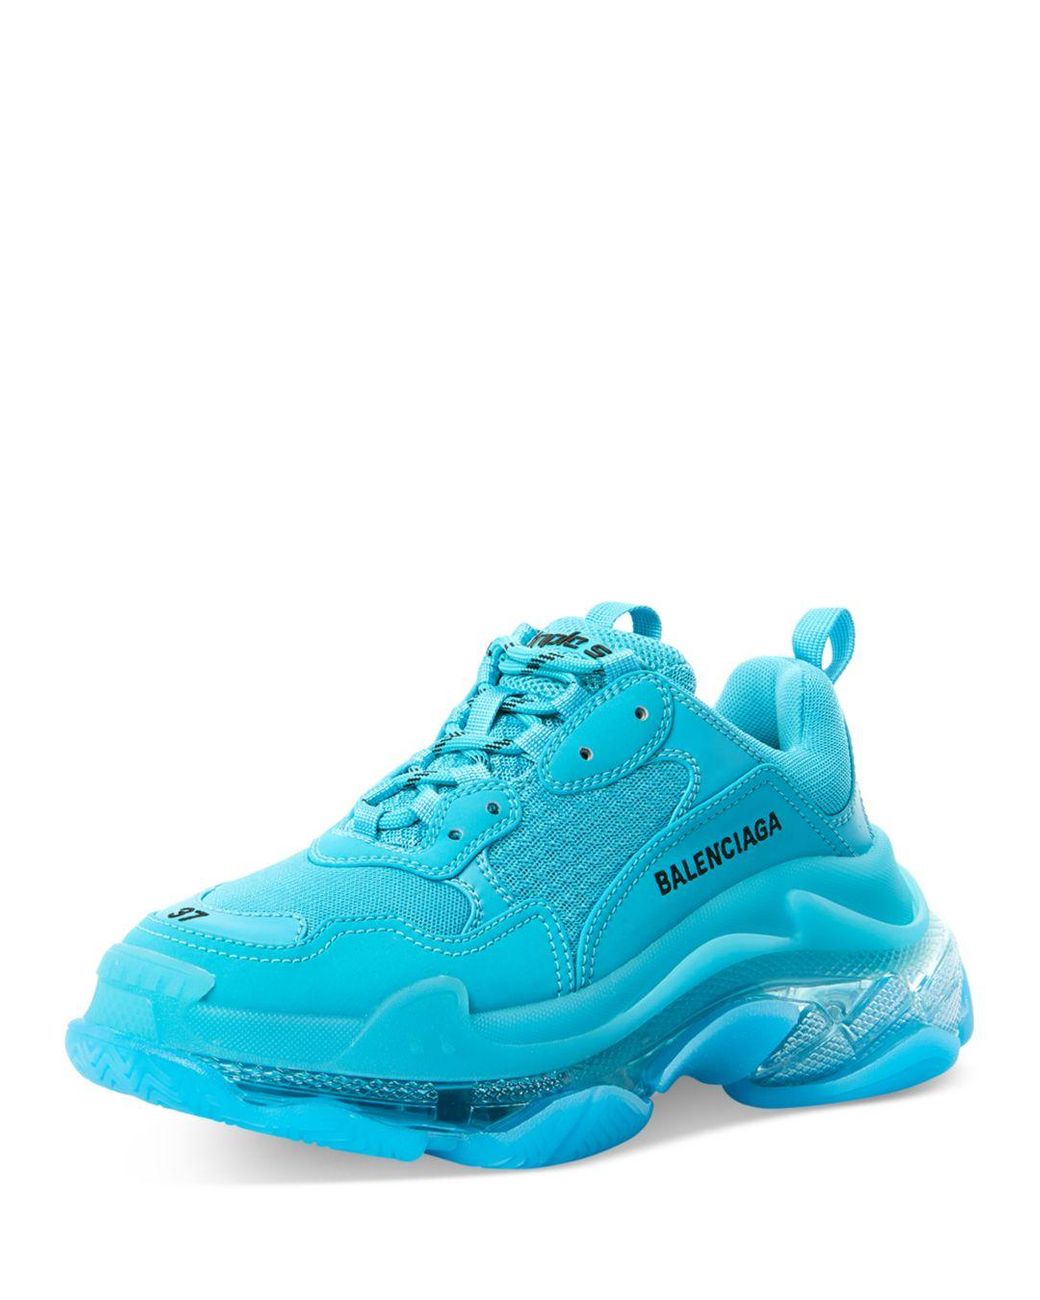 Balenciaga Triple S Clear Sole Chunky Sneakers in Blue | Lyst